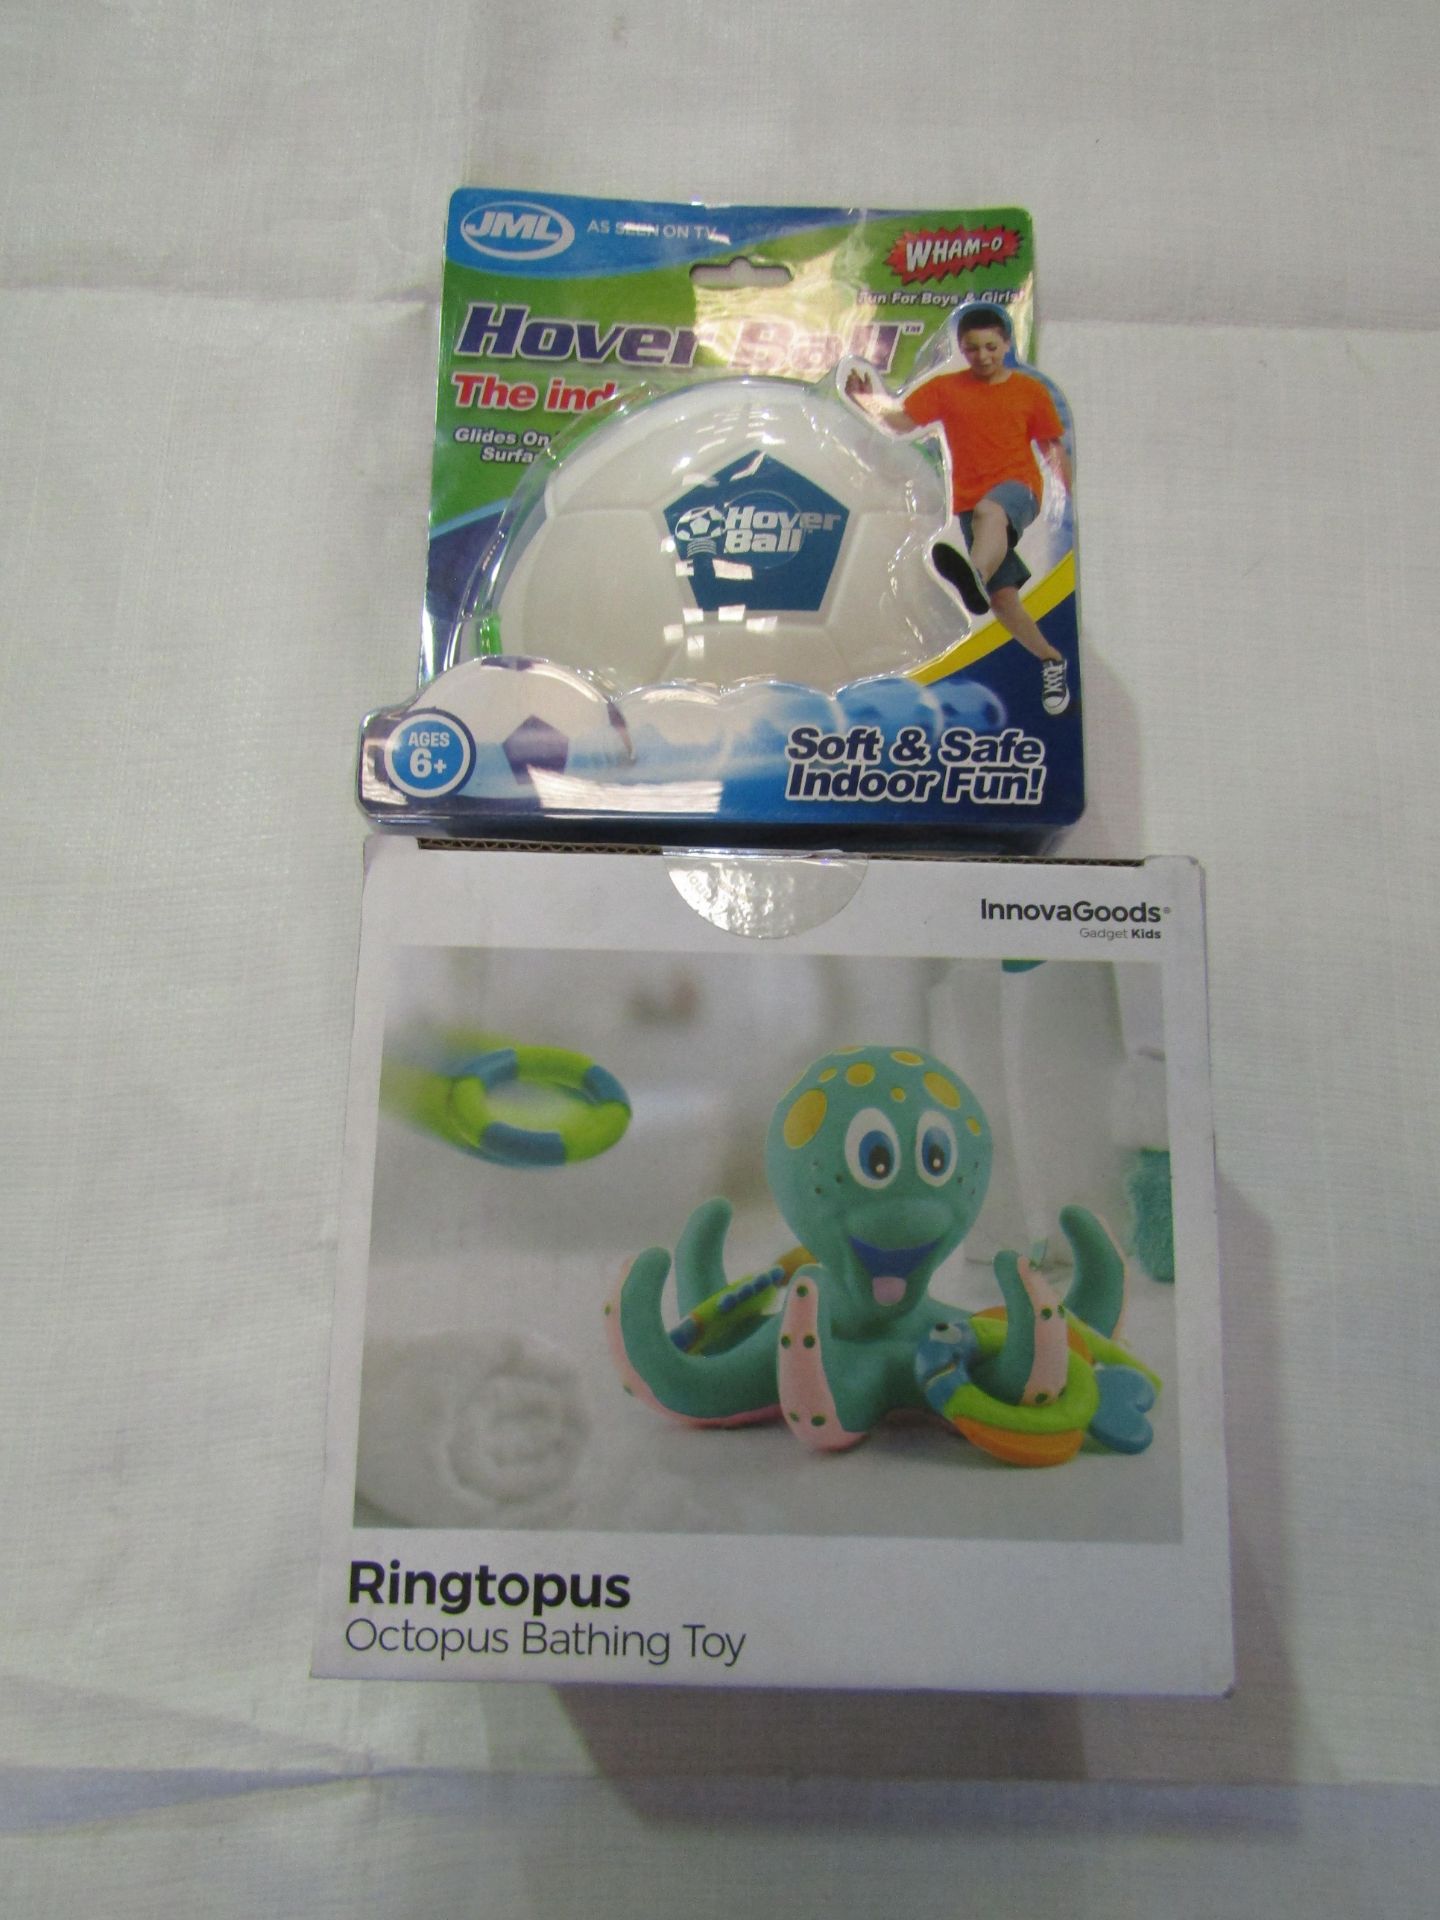 2x Items Being - 1x JML Hover Ball, The Indoor Ball That Glides - 1x Innovagoods Ringtopus Octopus